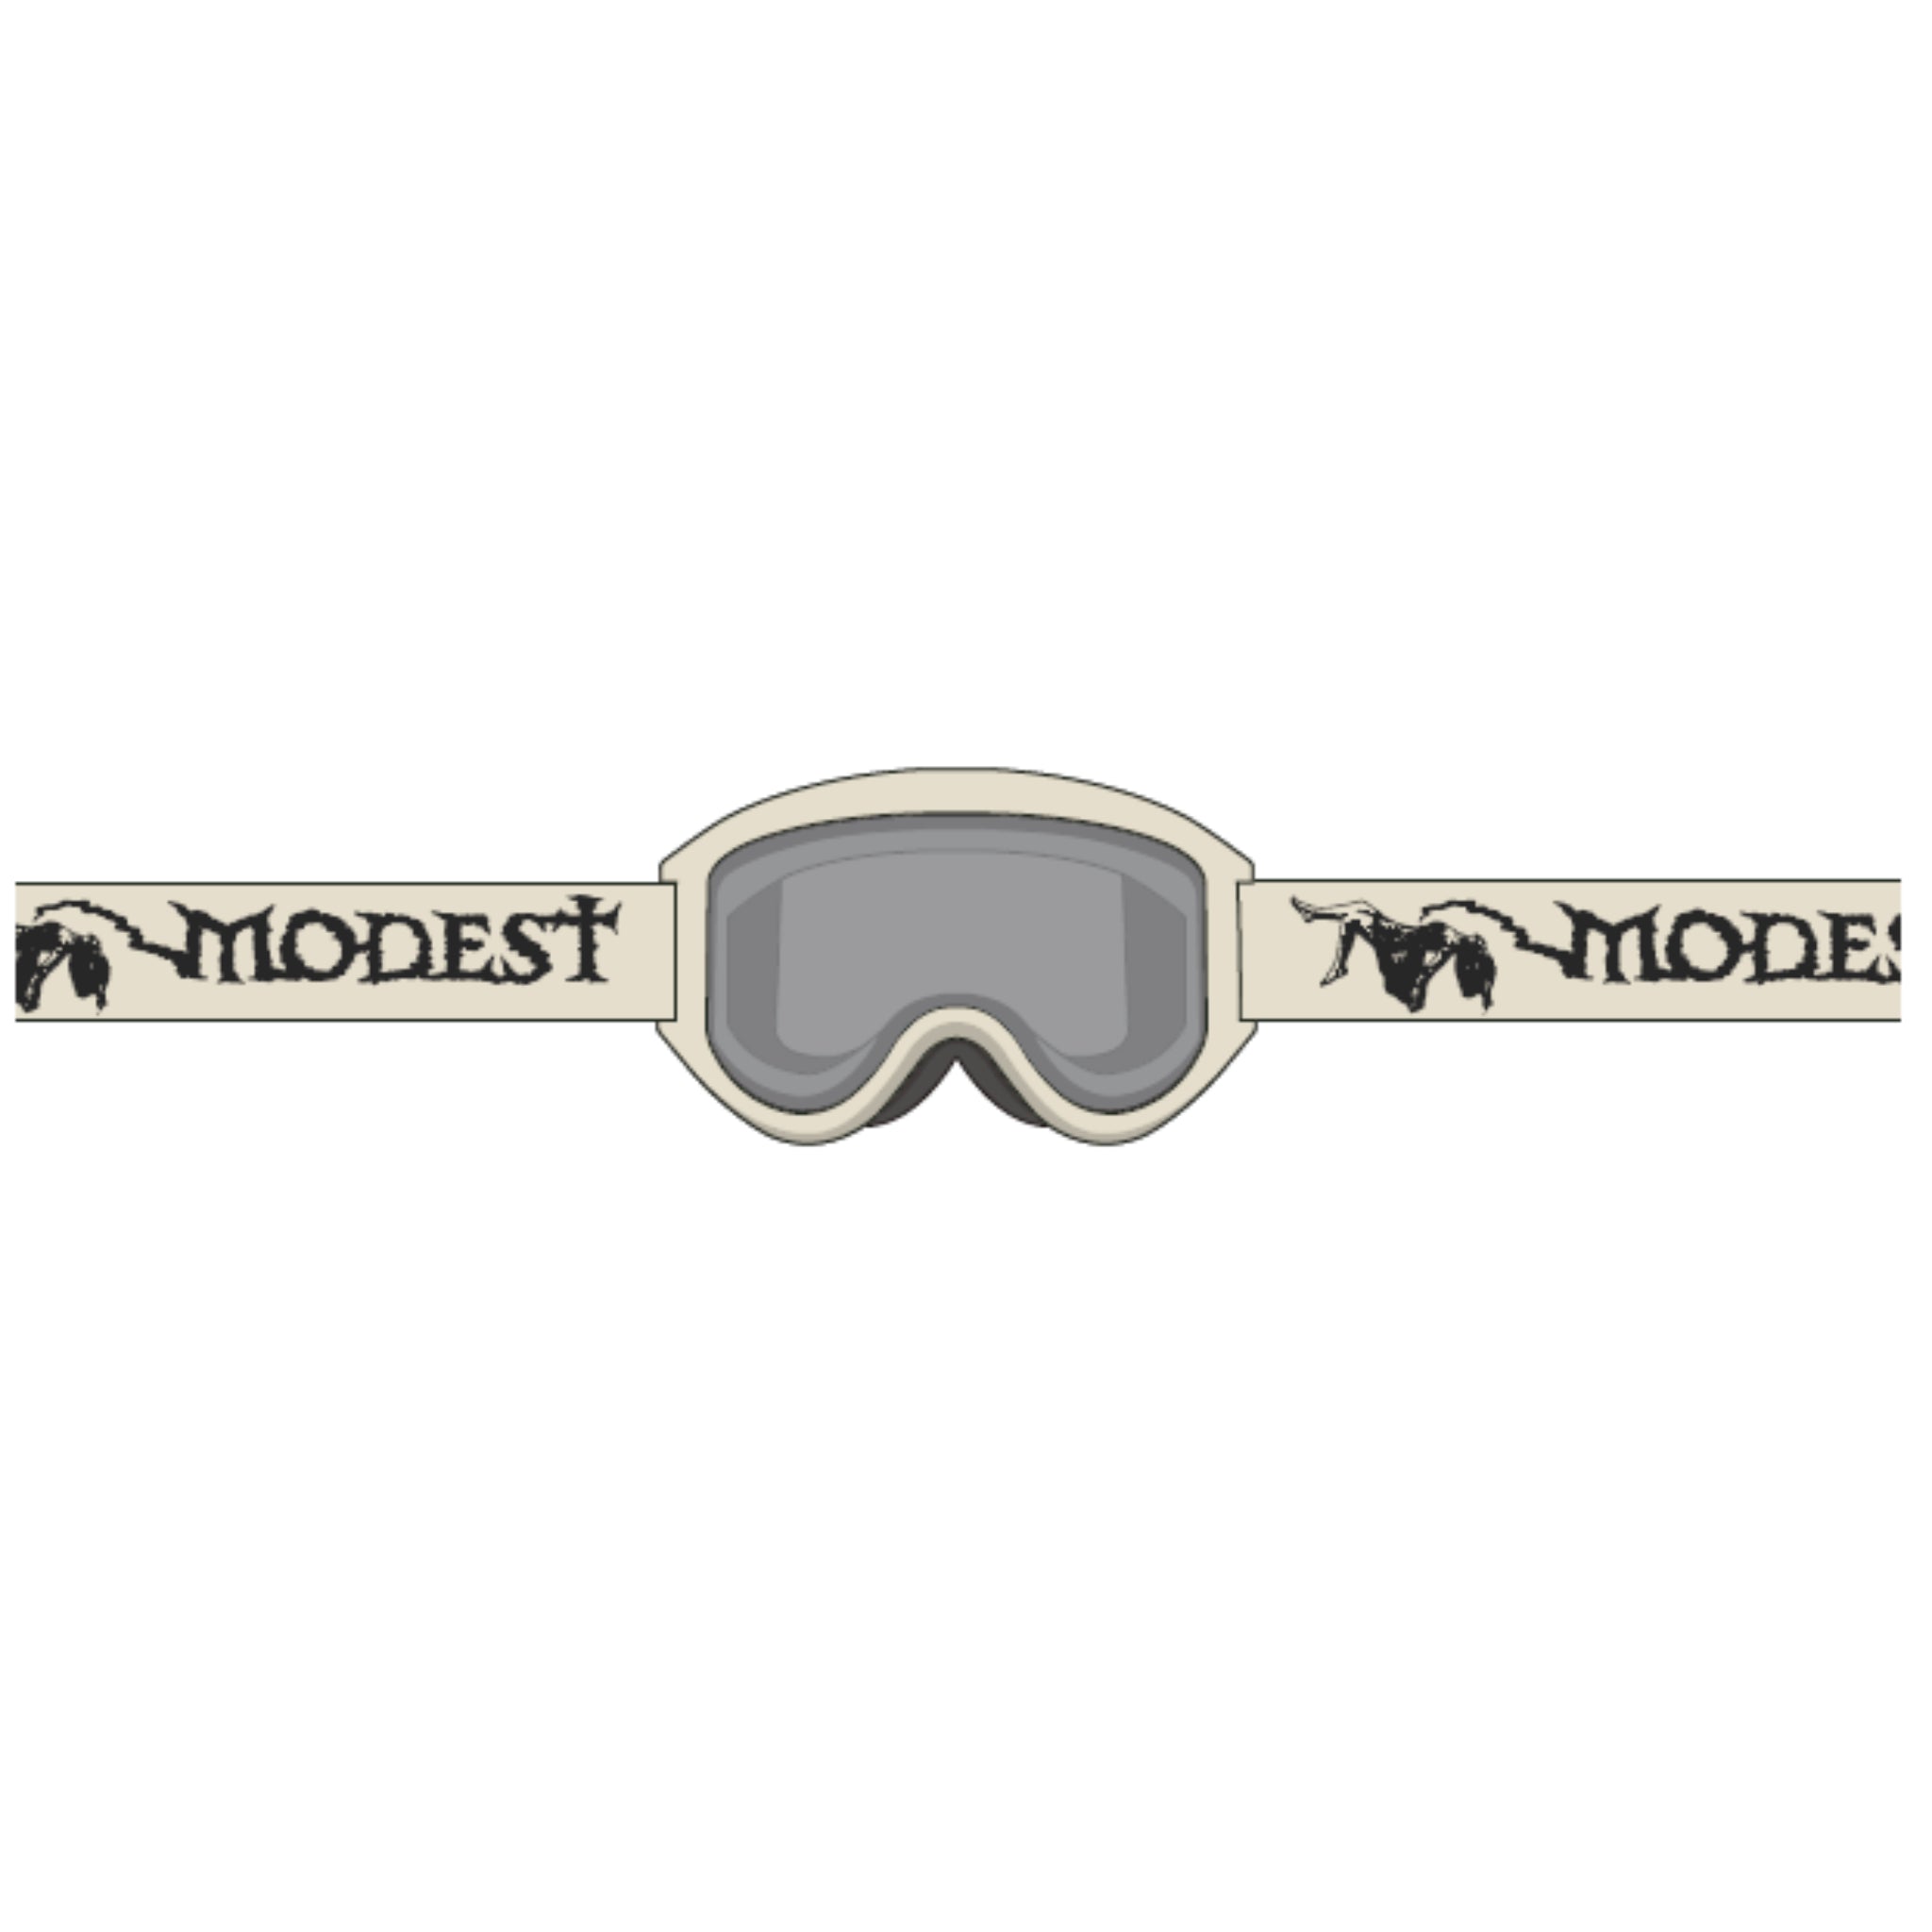 Modest Team Andy James Snow Goggle